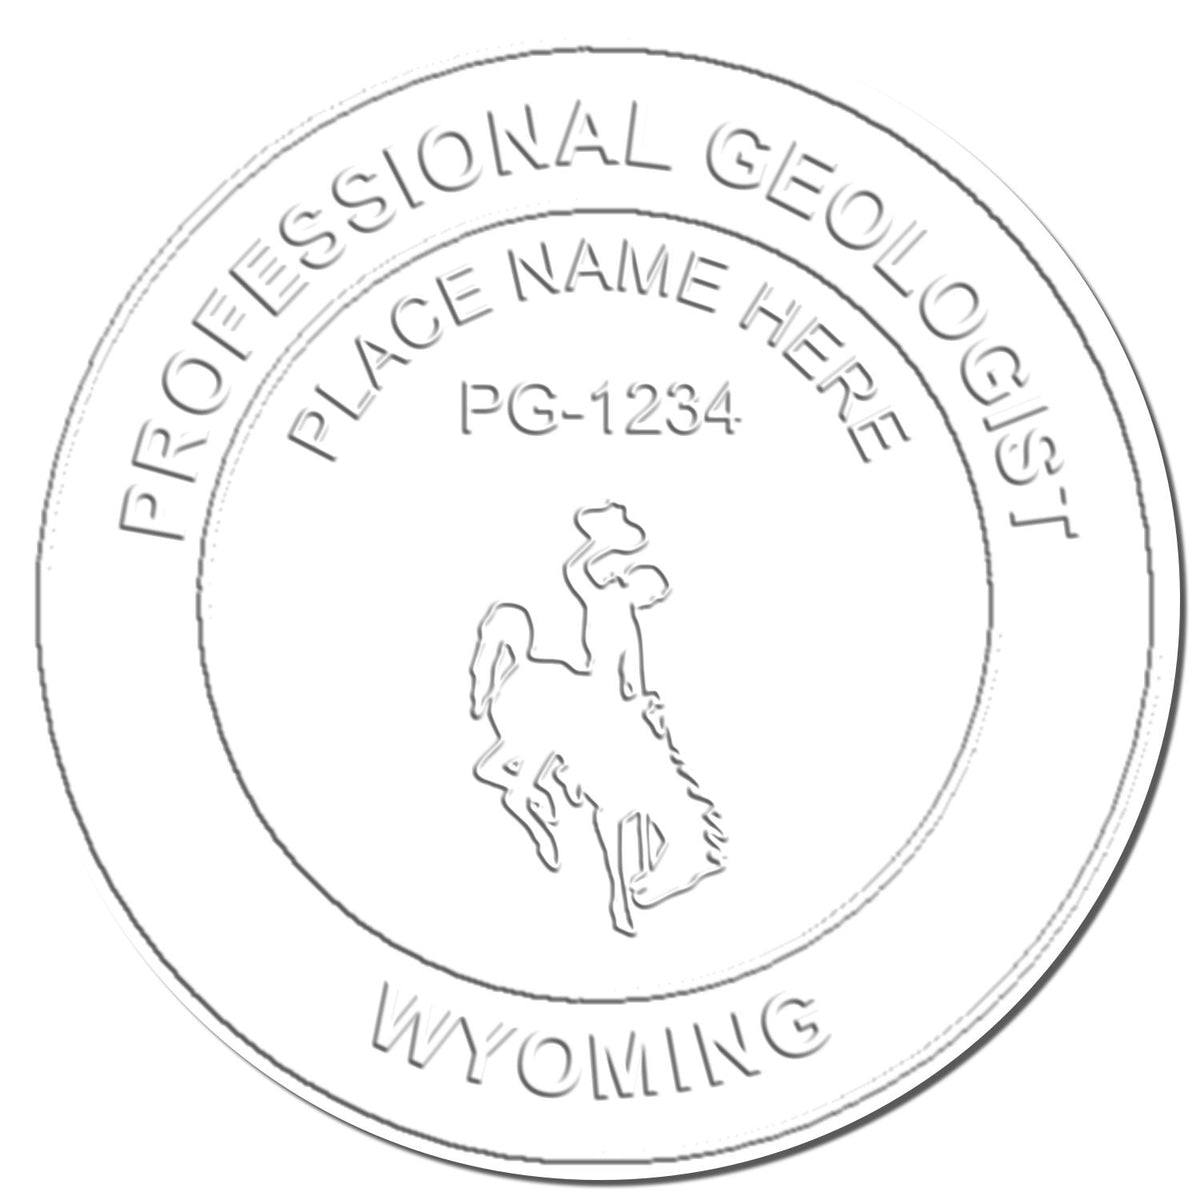 The Wyoming Geologist Desk Seal stamp impression comes to life with a crisp, detailed image stamped on paper - showcasing true professional quality.